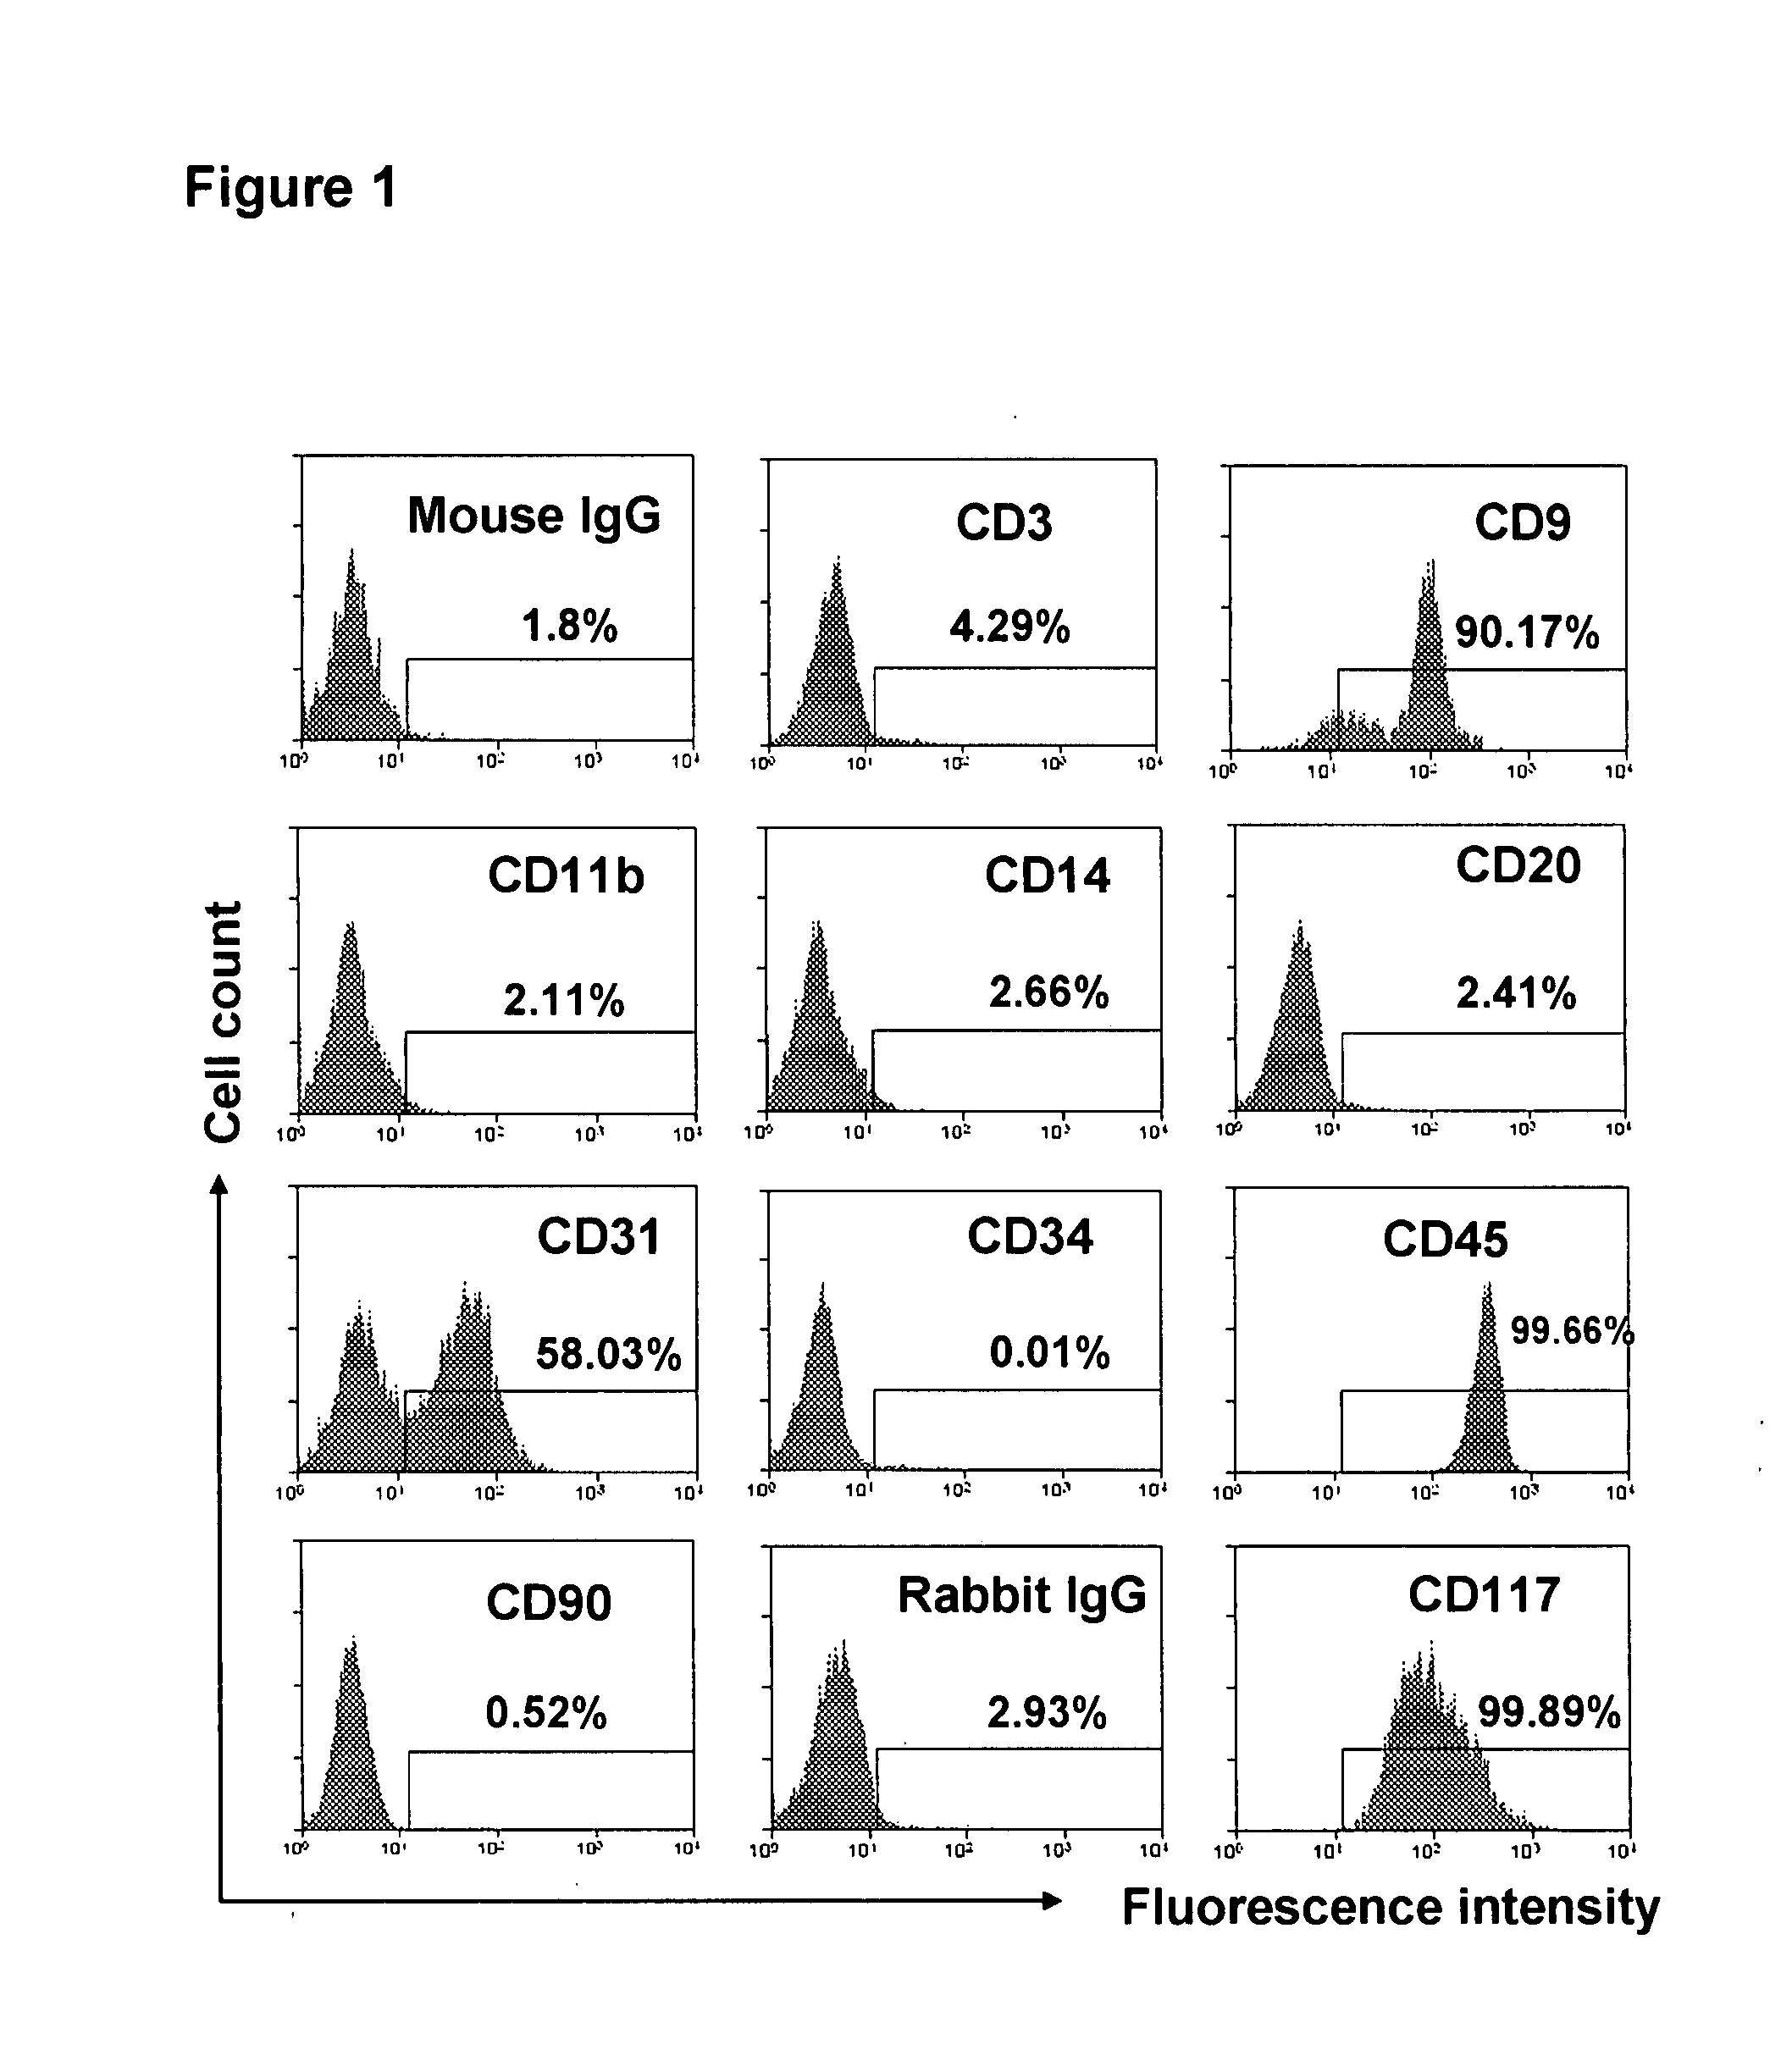 Embryonic-like stem cells derived from adult human peripheral blood and methods of use